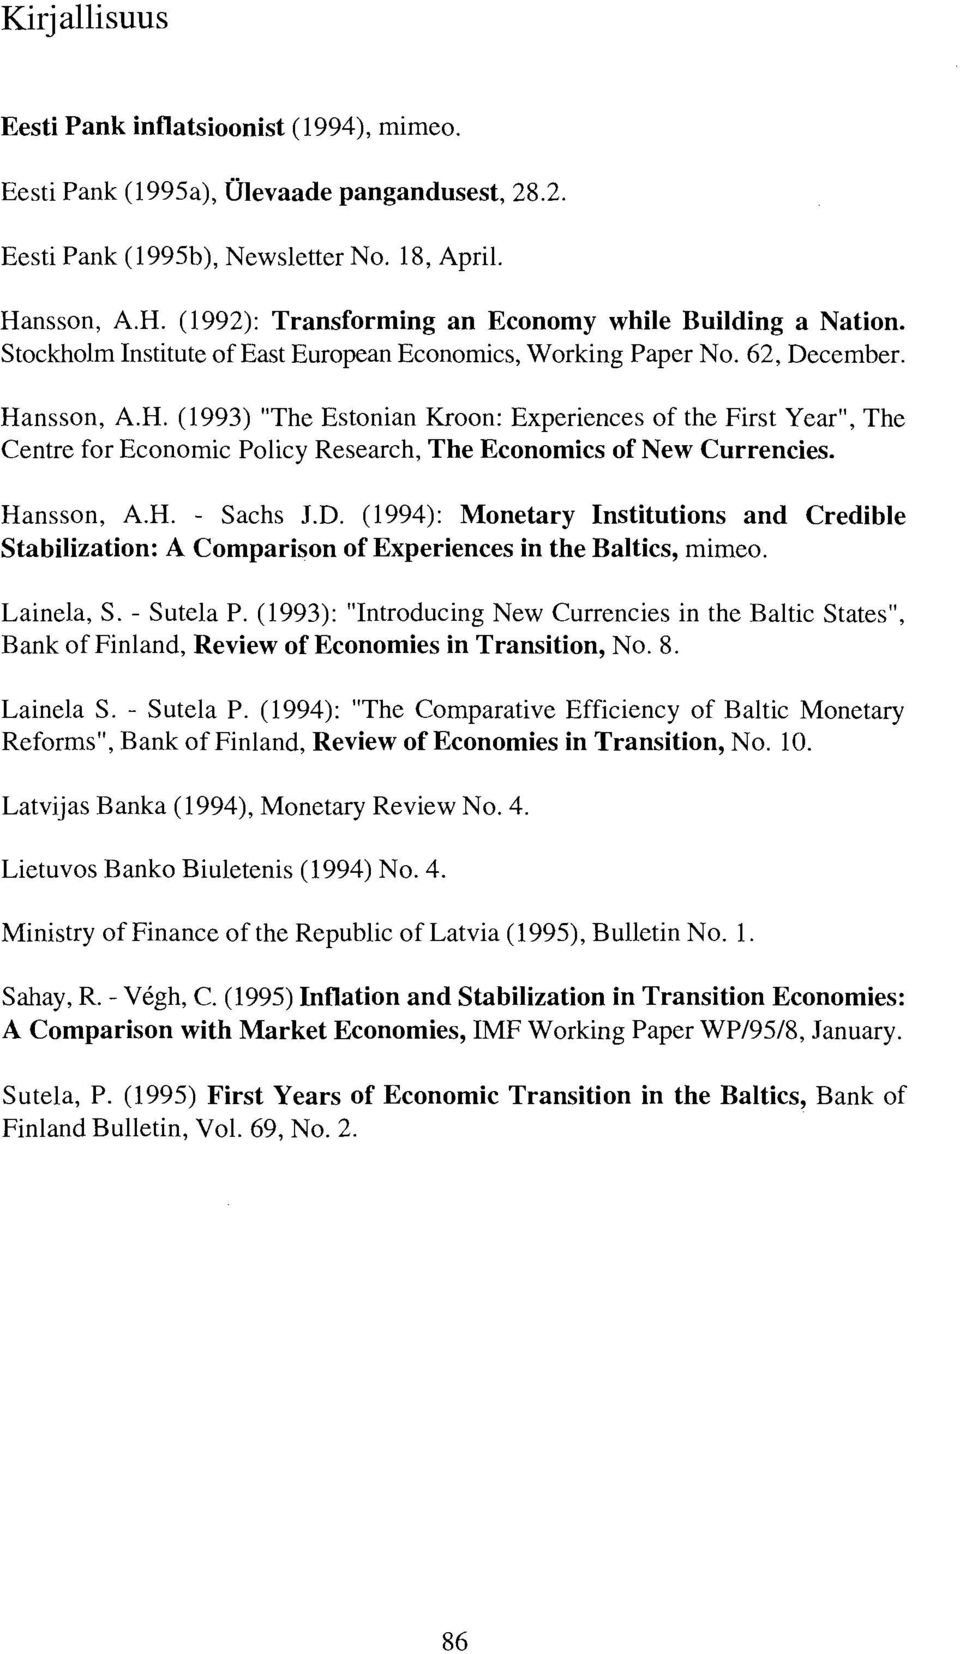 Hansson, A.H. - Sachs J.D. (1994): Monetary Institutions and Credible Stabilization: A Comparison of Experiences in the Baltics, mimeo. Lainela, S. - Sutela P.